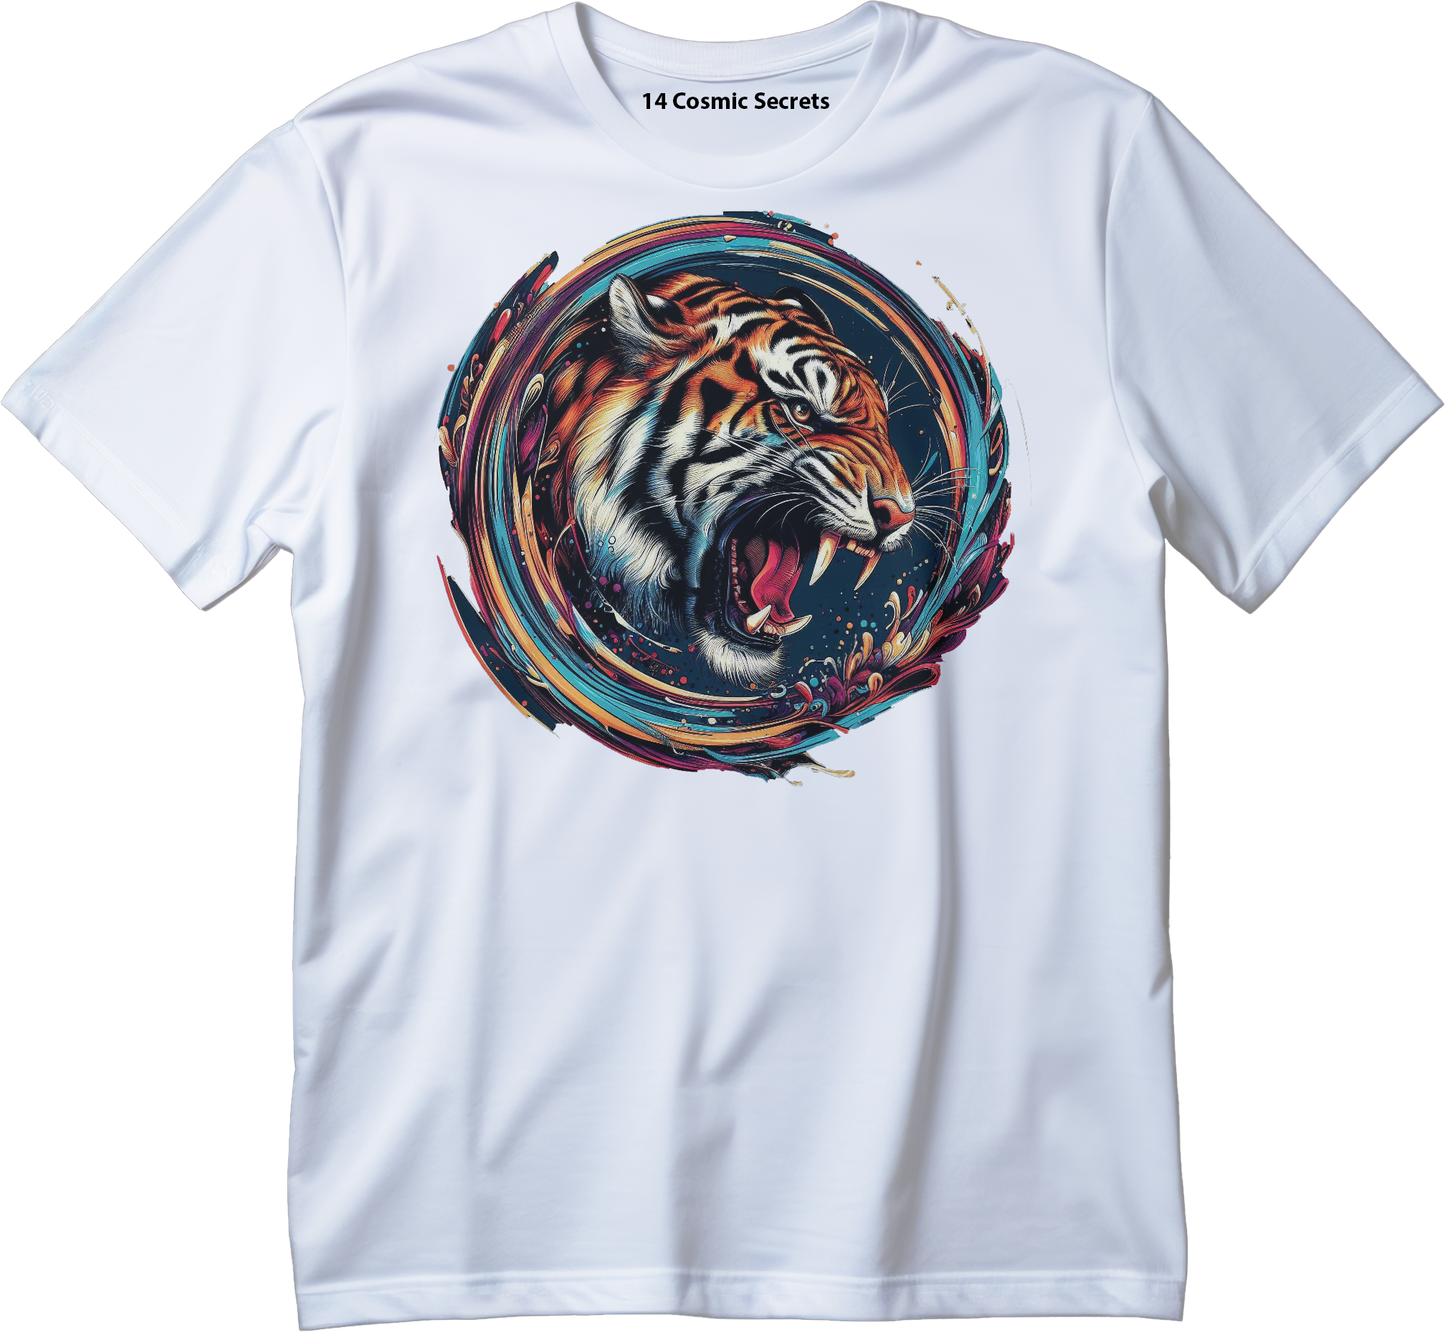 Bengal Stripes Supreme Tee Graphic Printed T-Shirt  Cotton T-Shirt Magnificence of India T-Shirt